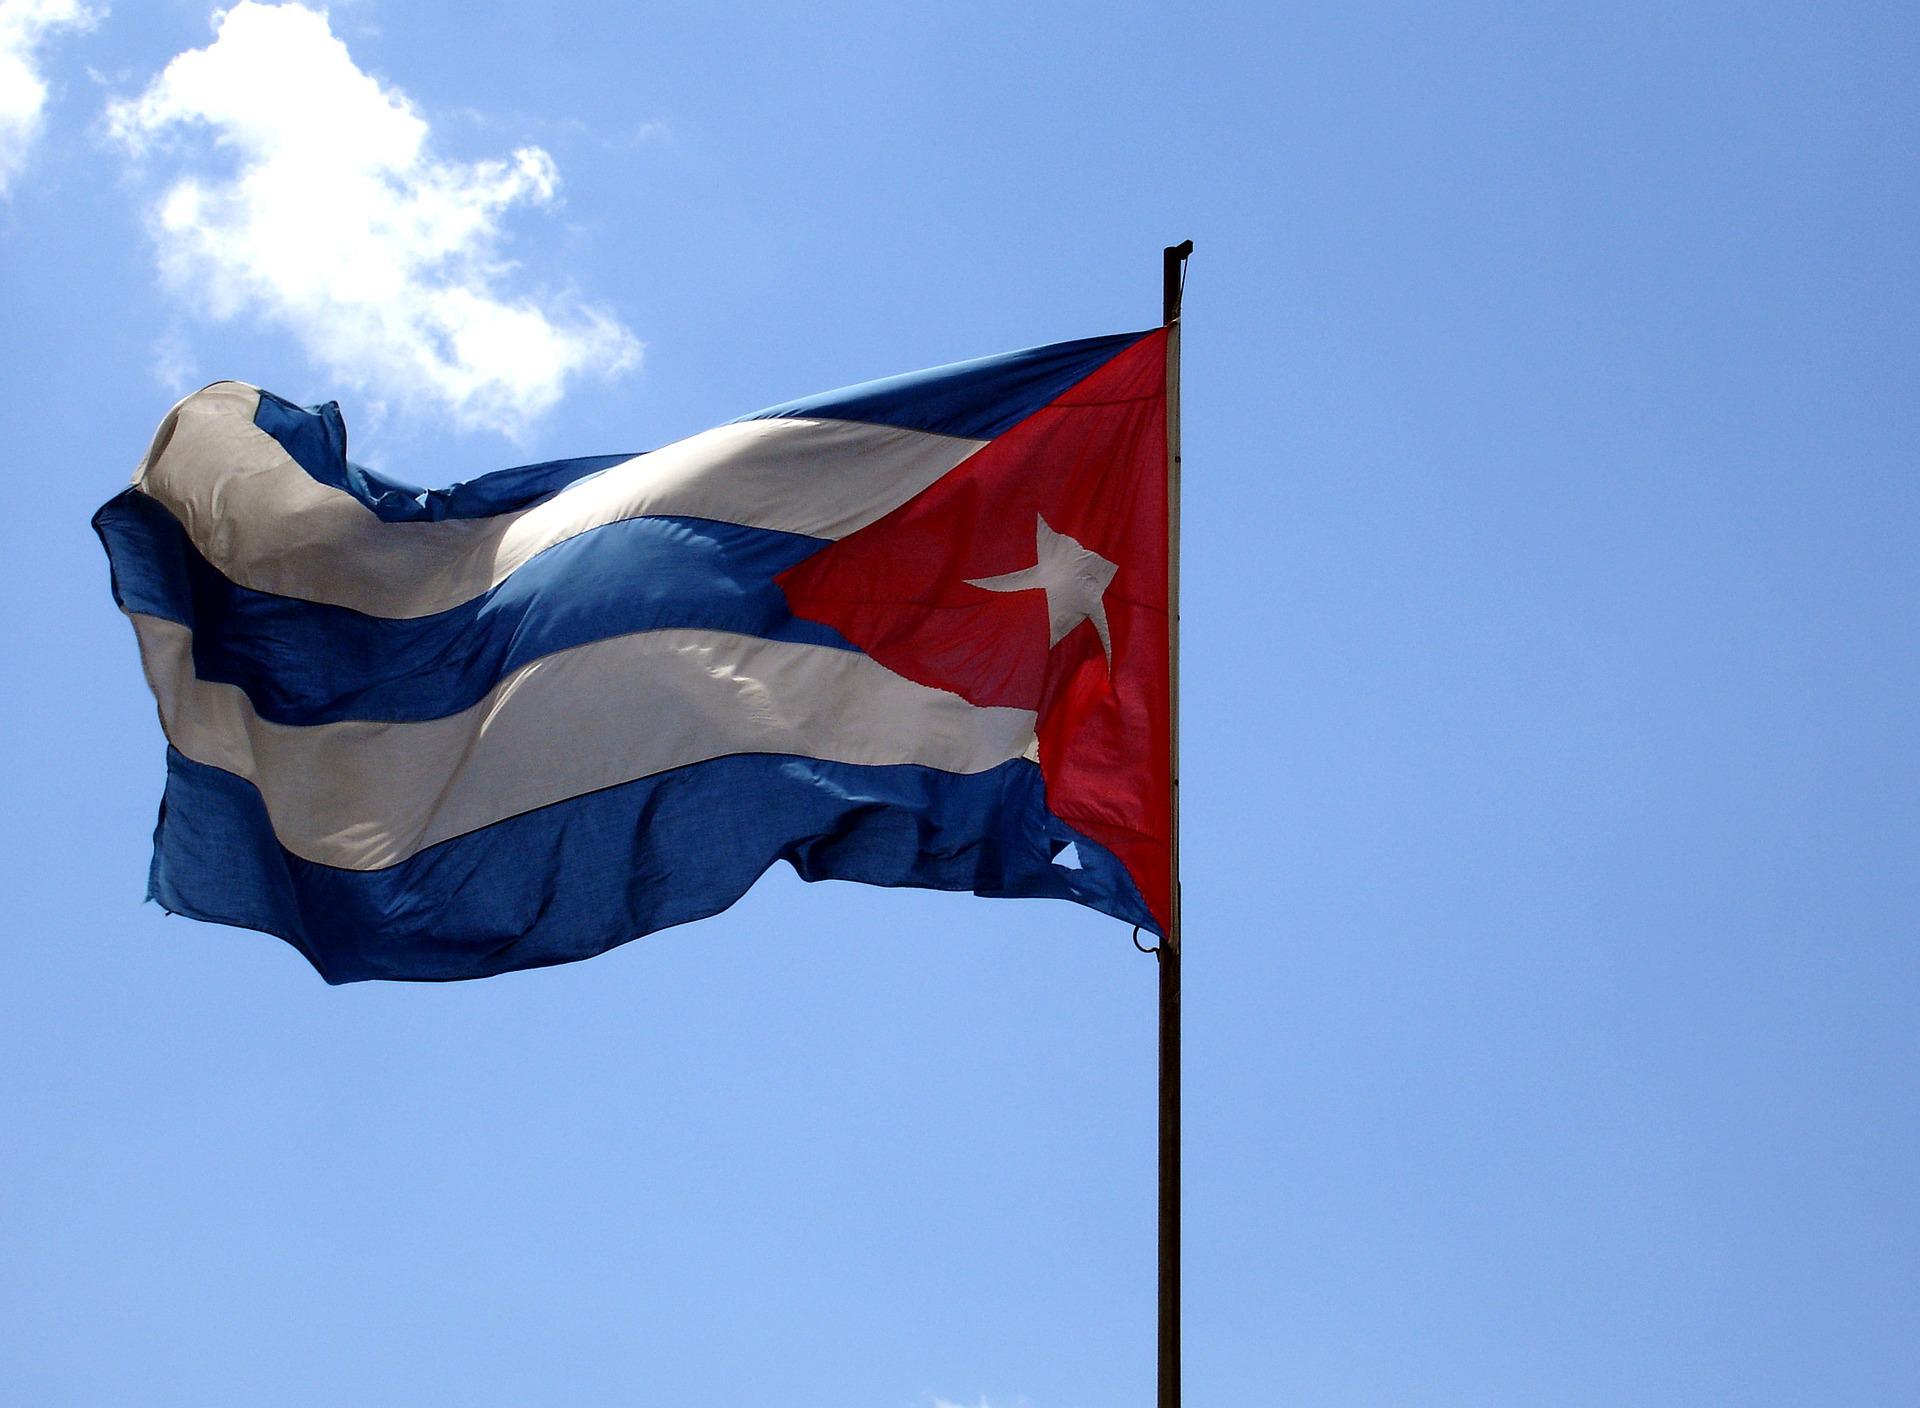 The Cuban flag flying in the sky